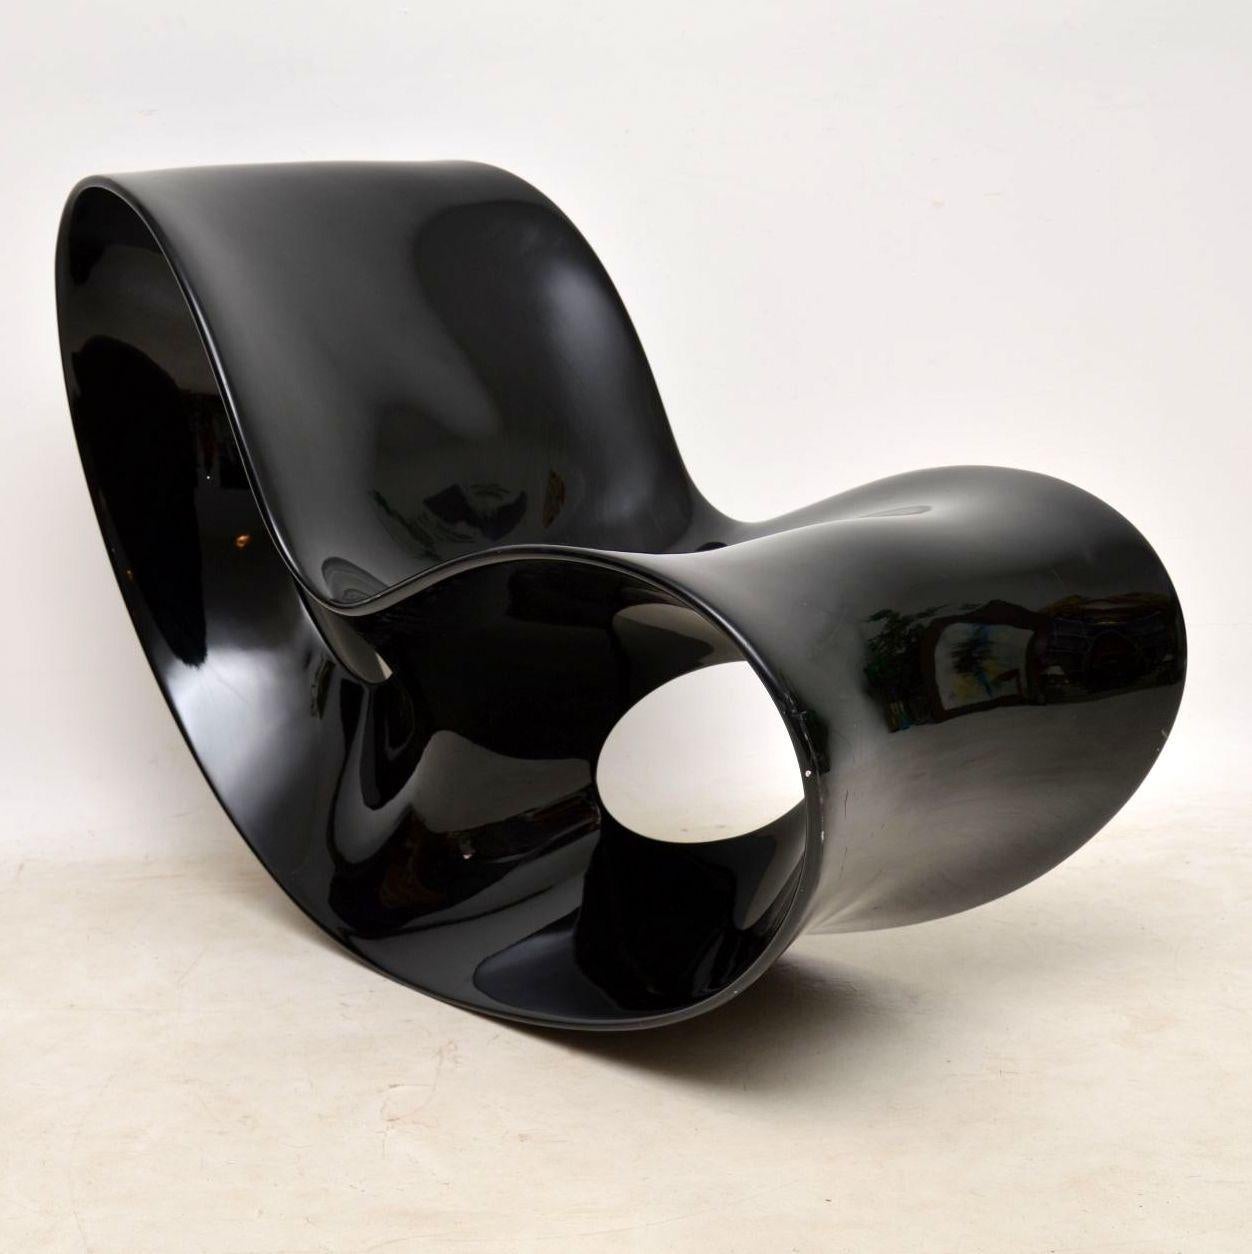 Italian Stunning and Iconic Design, This Is the ‘Voido’ Rocking Chair in a Black Glos